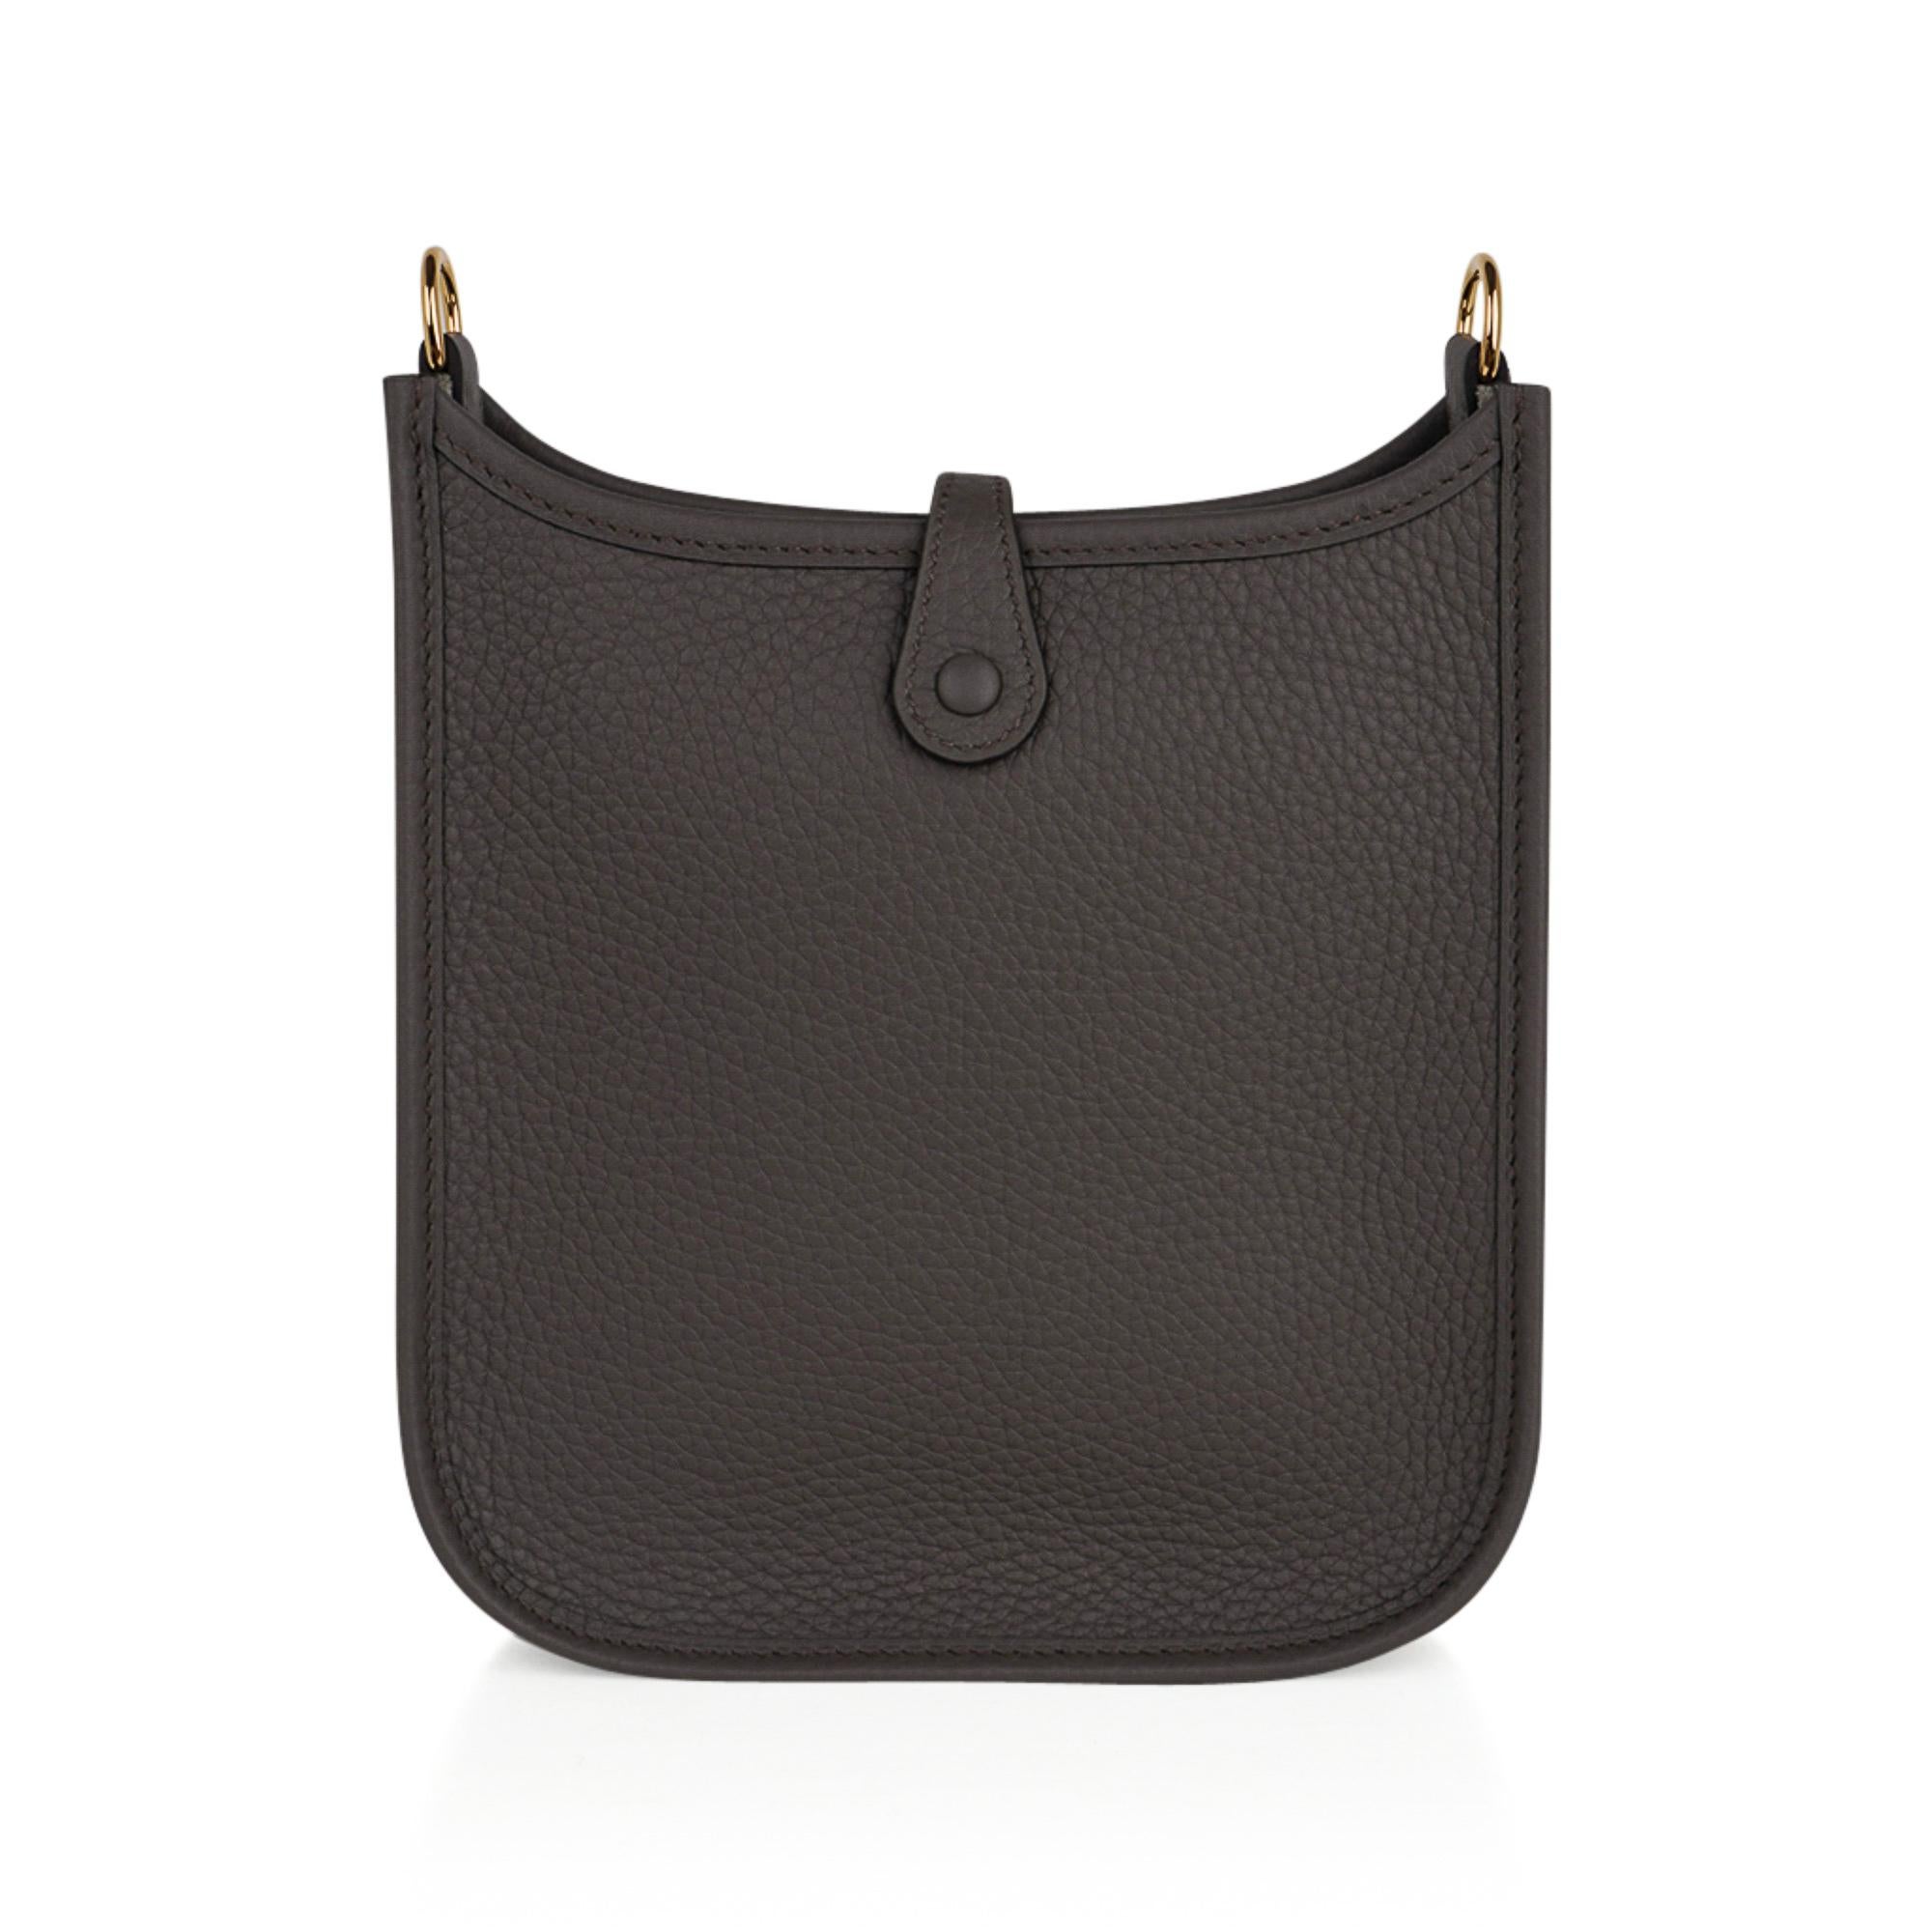 Mightychic offers an Hermes Evelyne TPM Etain bag easily worn as a shoulder or crossbody.
Clemence leather is soft and scratch resistant.
Signature perforated H on front of bag.
Lush with Gold hardware.
Fabulous shoulder or cross body bag.
Sport